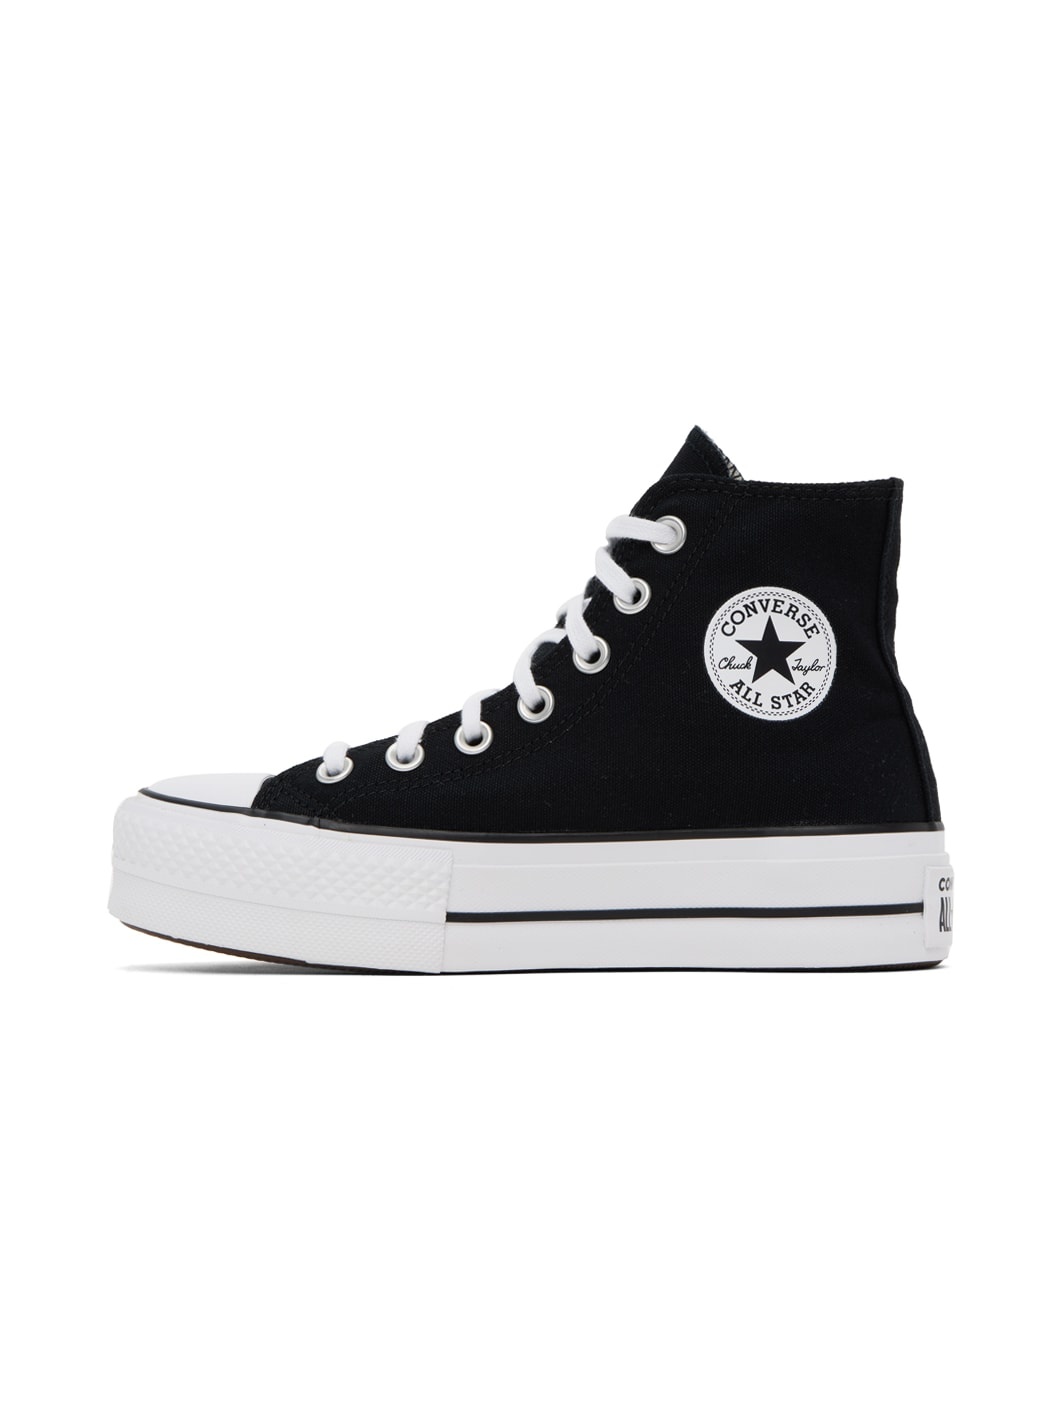 Black Chuck Taylor All Star Sneakers - 3